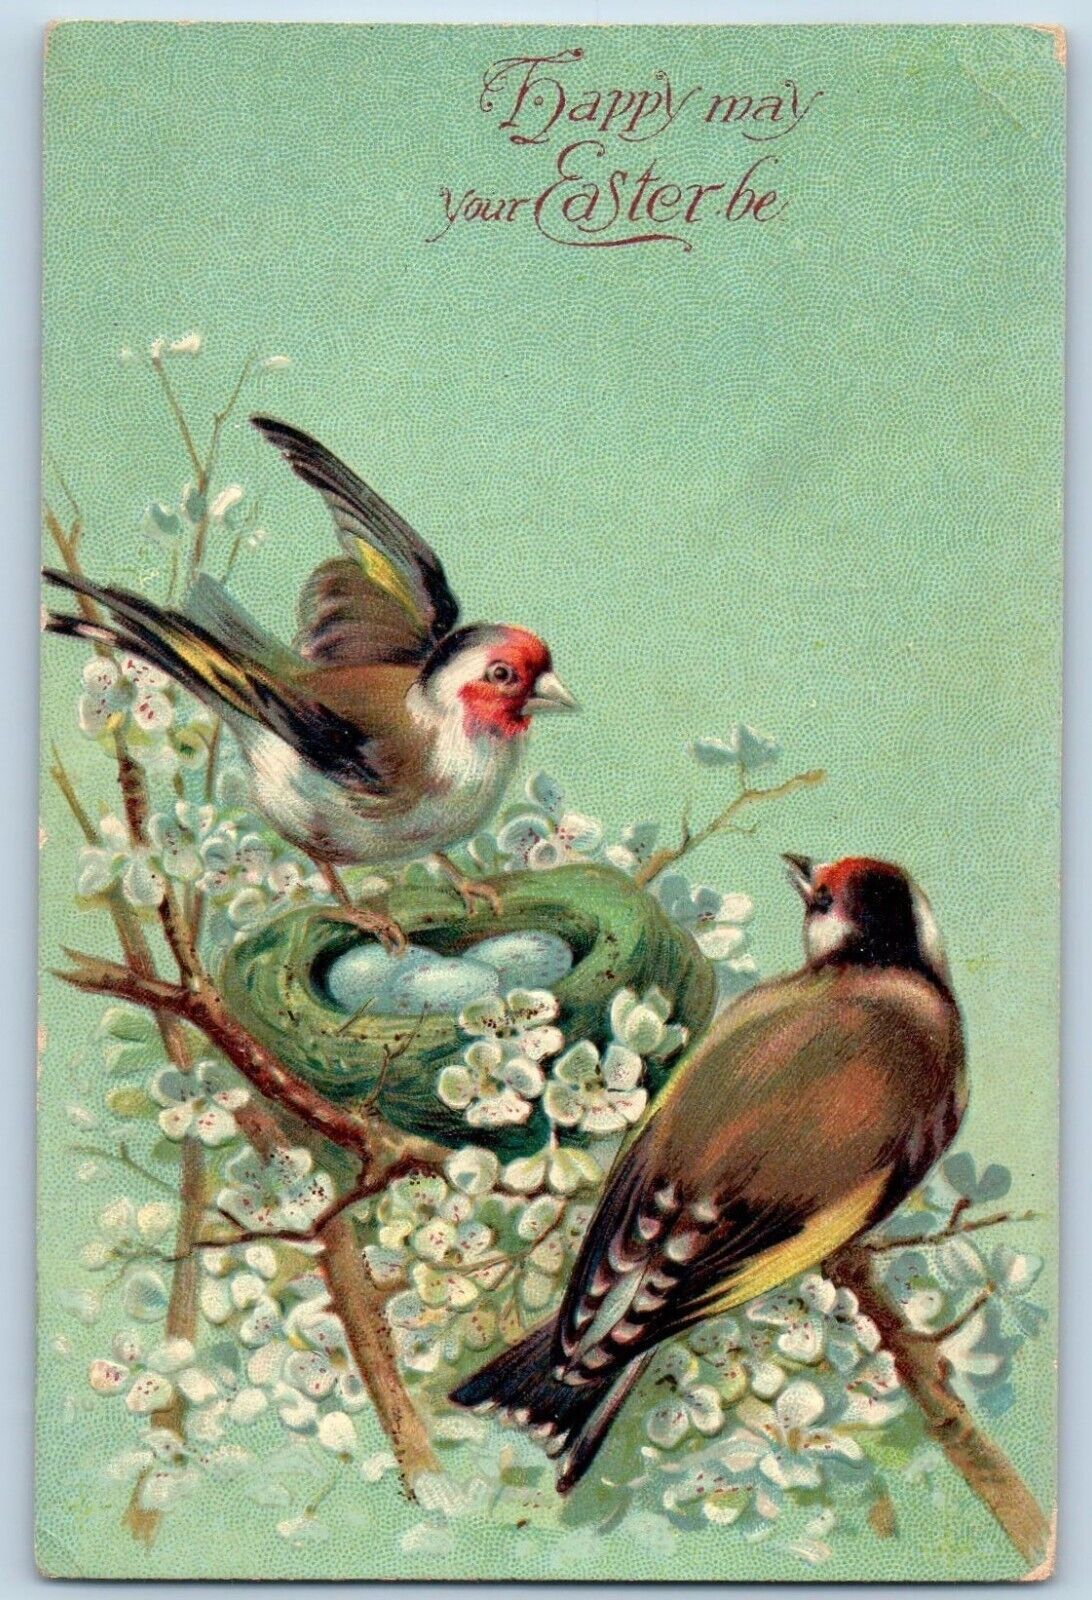 Cameron Wisconsin WI Postcard Easter Birds Egg Nest Flowers Embossed 1909 Posted